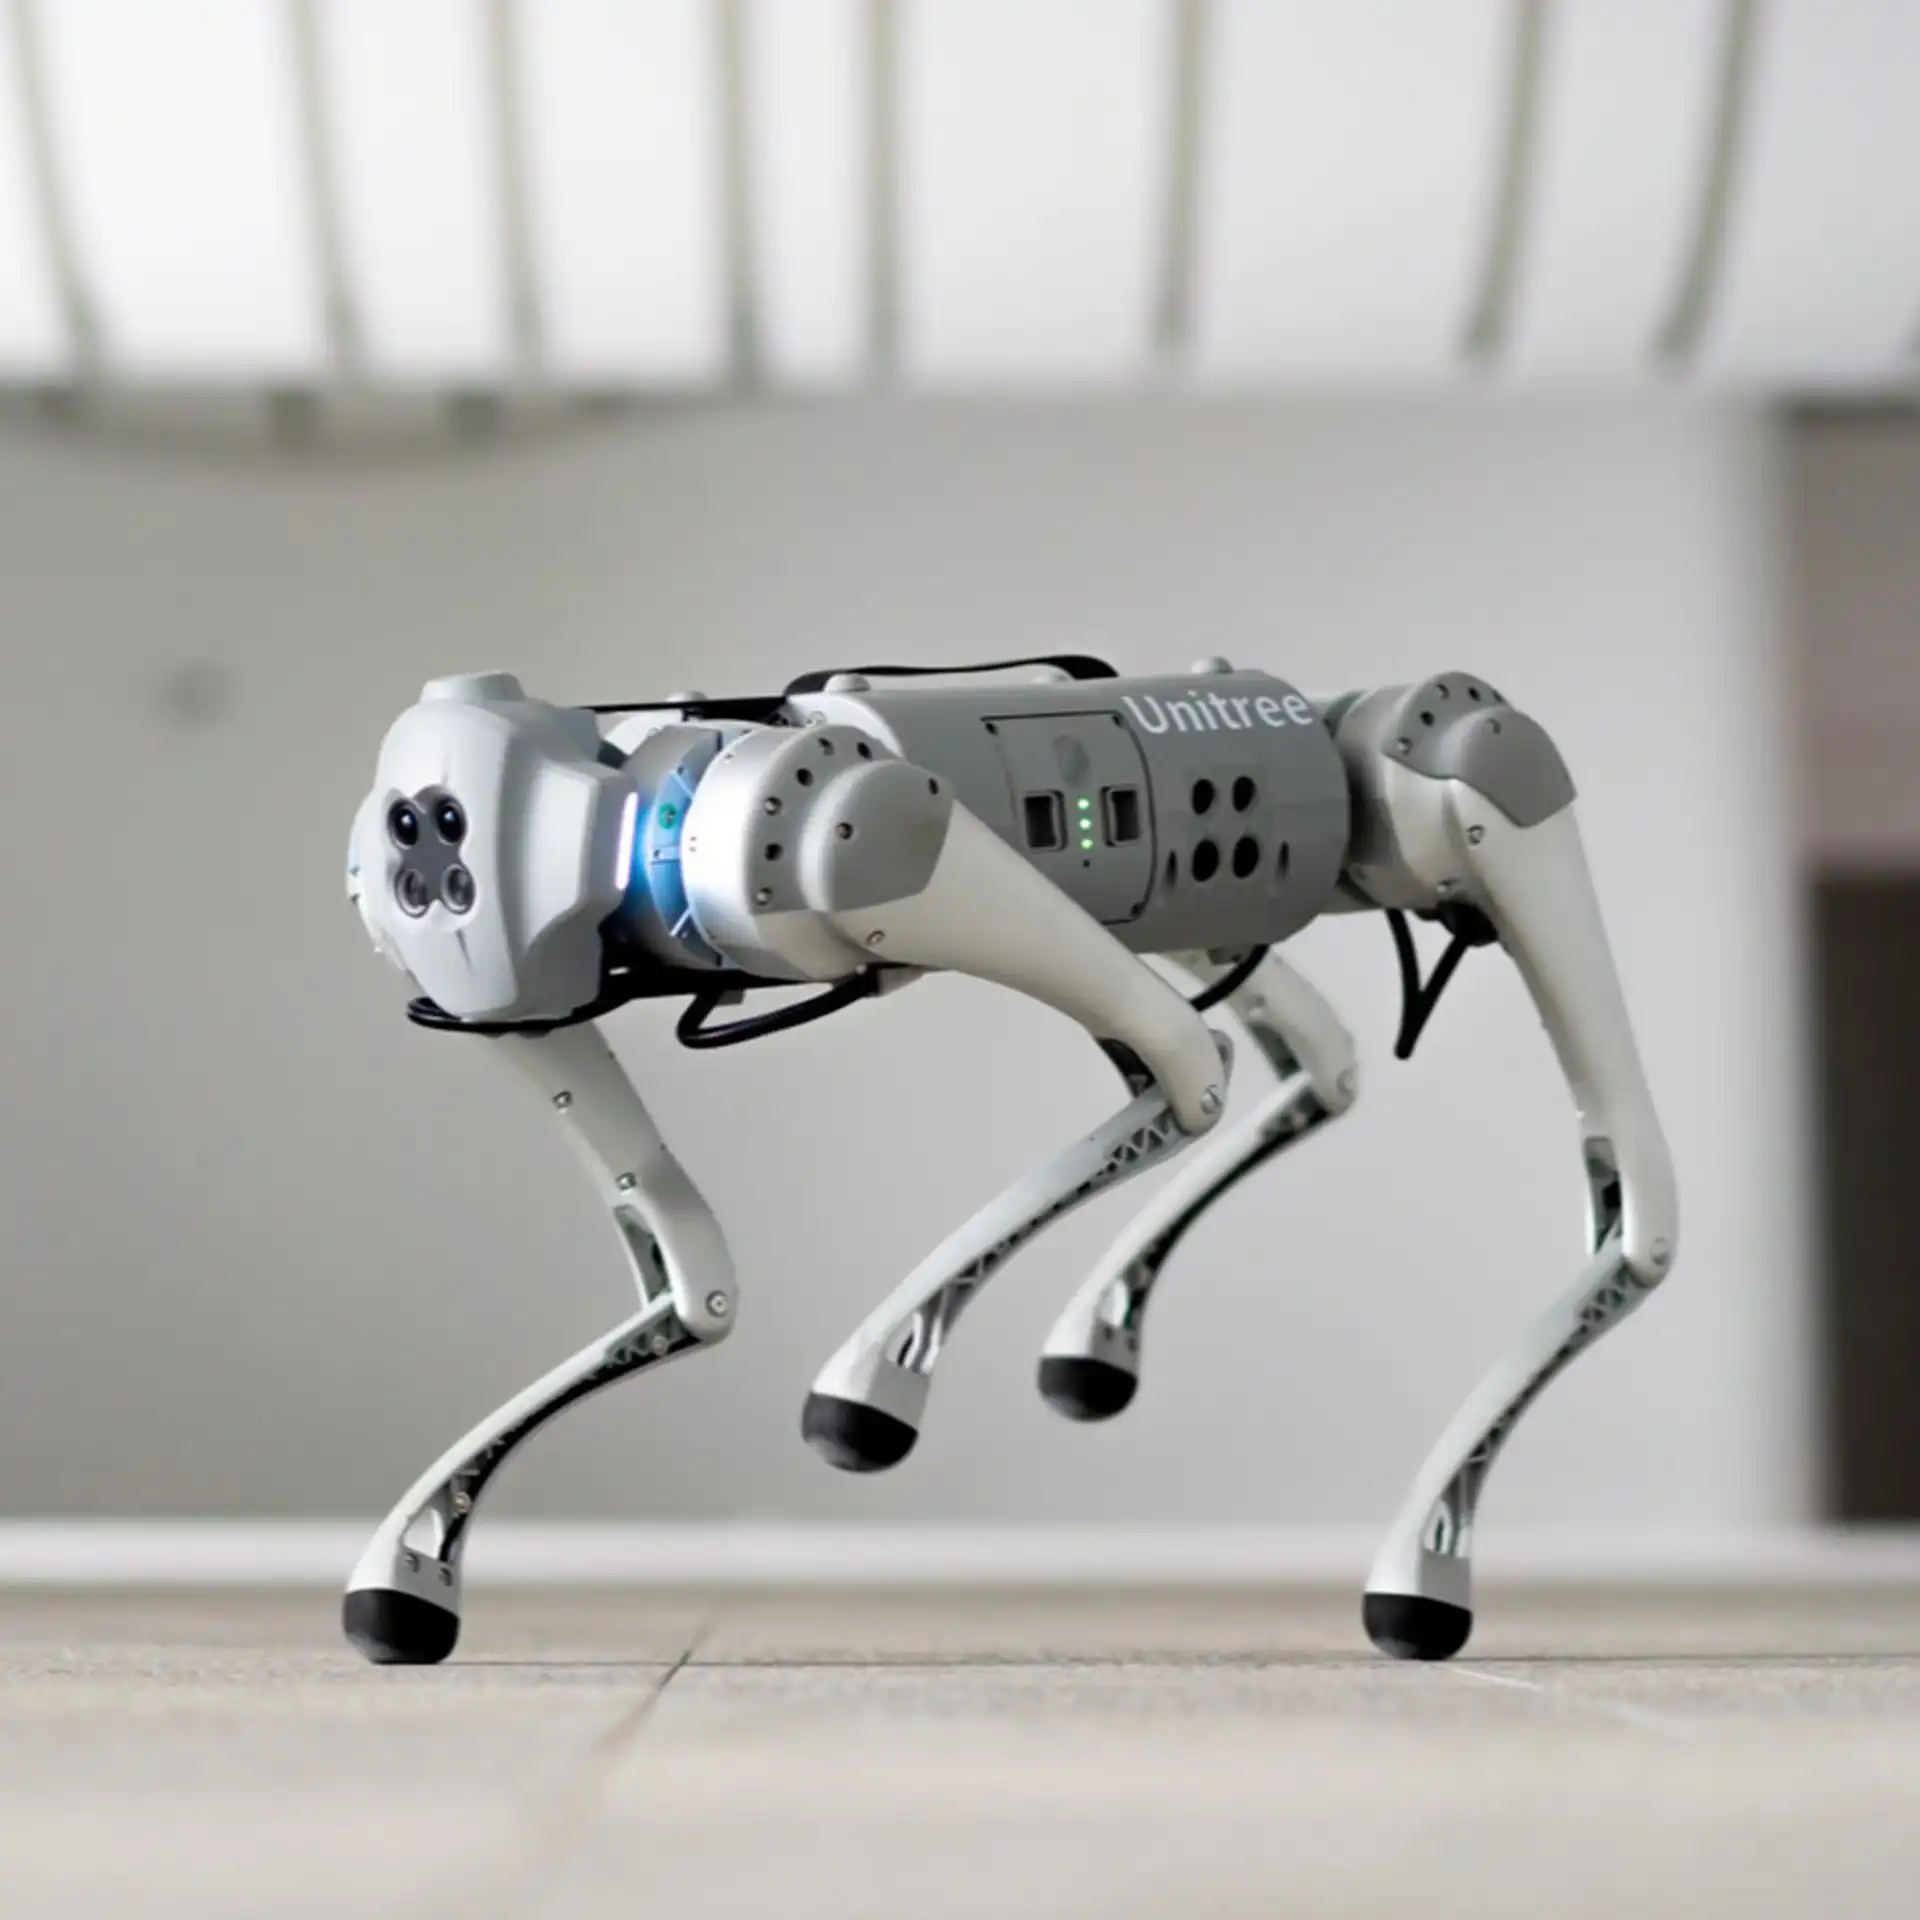 Unitree Go1 Quadruped Robot with AI Vision Powered by Unitree Robotics Open Source Robot Dog for MIT Education